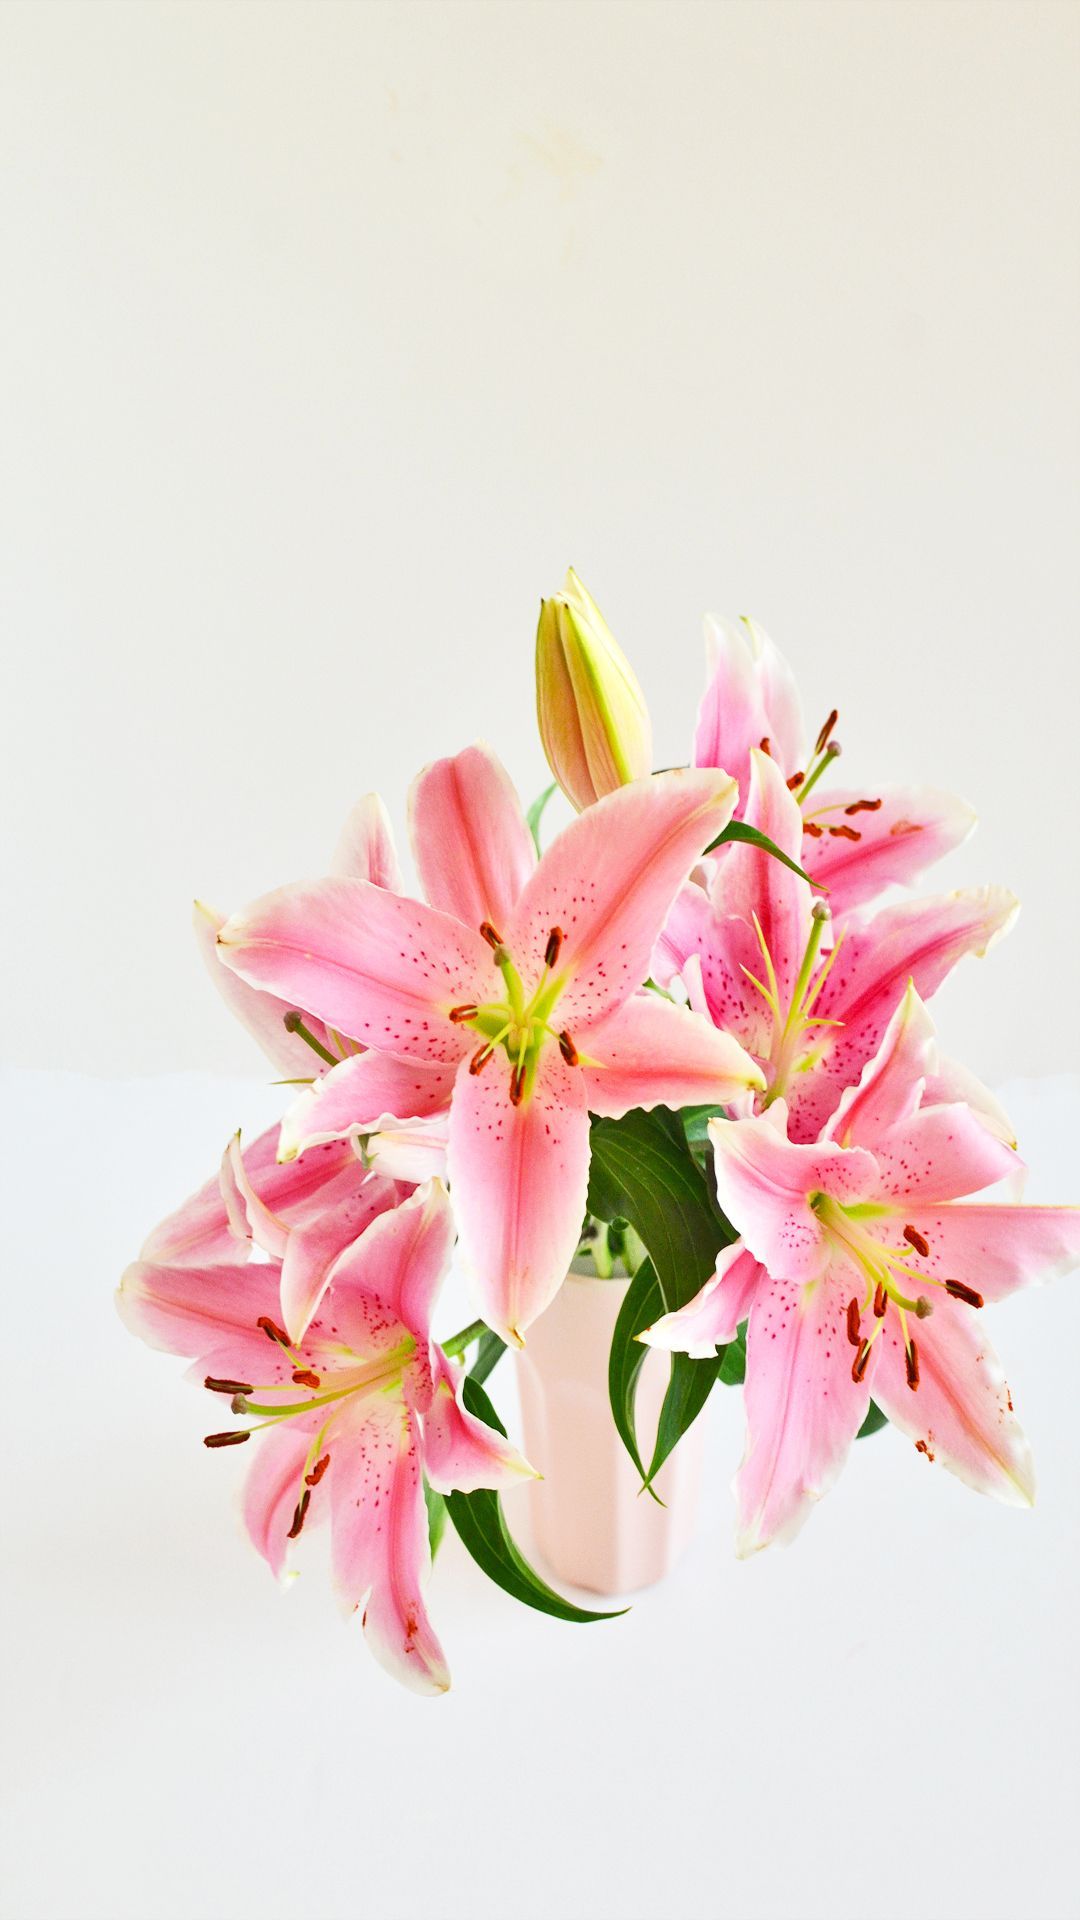 Free Lily iPhone Wallpaper. Enthralling gumption. Pretty wallpaper, iPhone wallpaper, Paper flowers